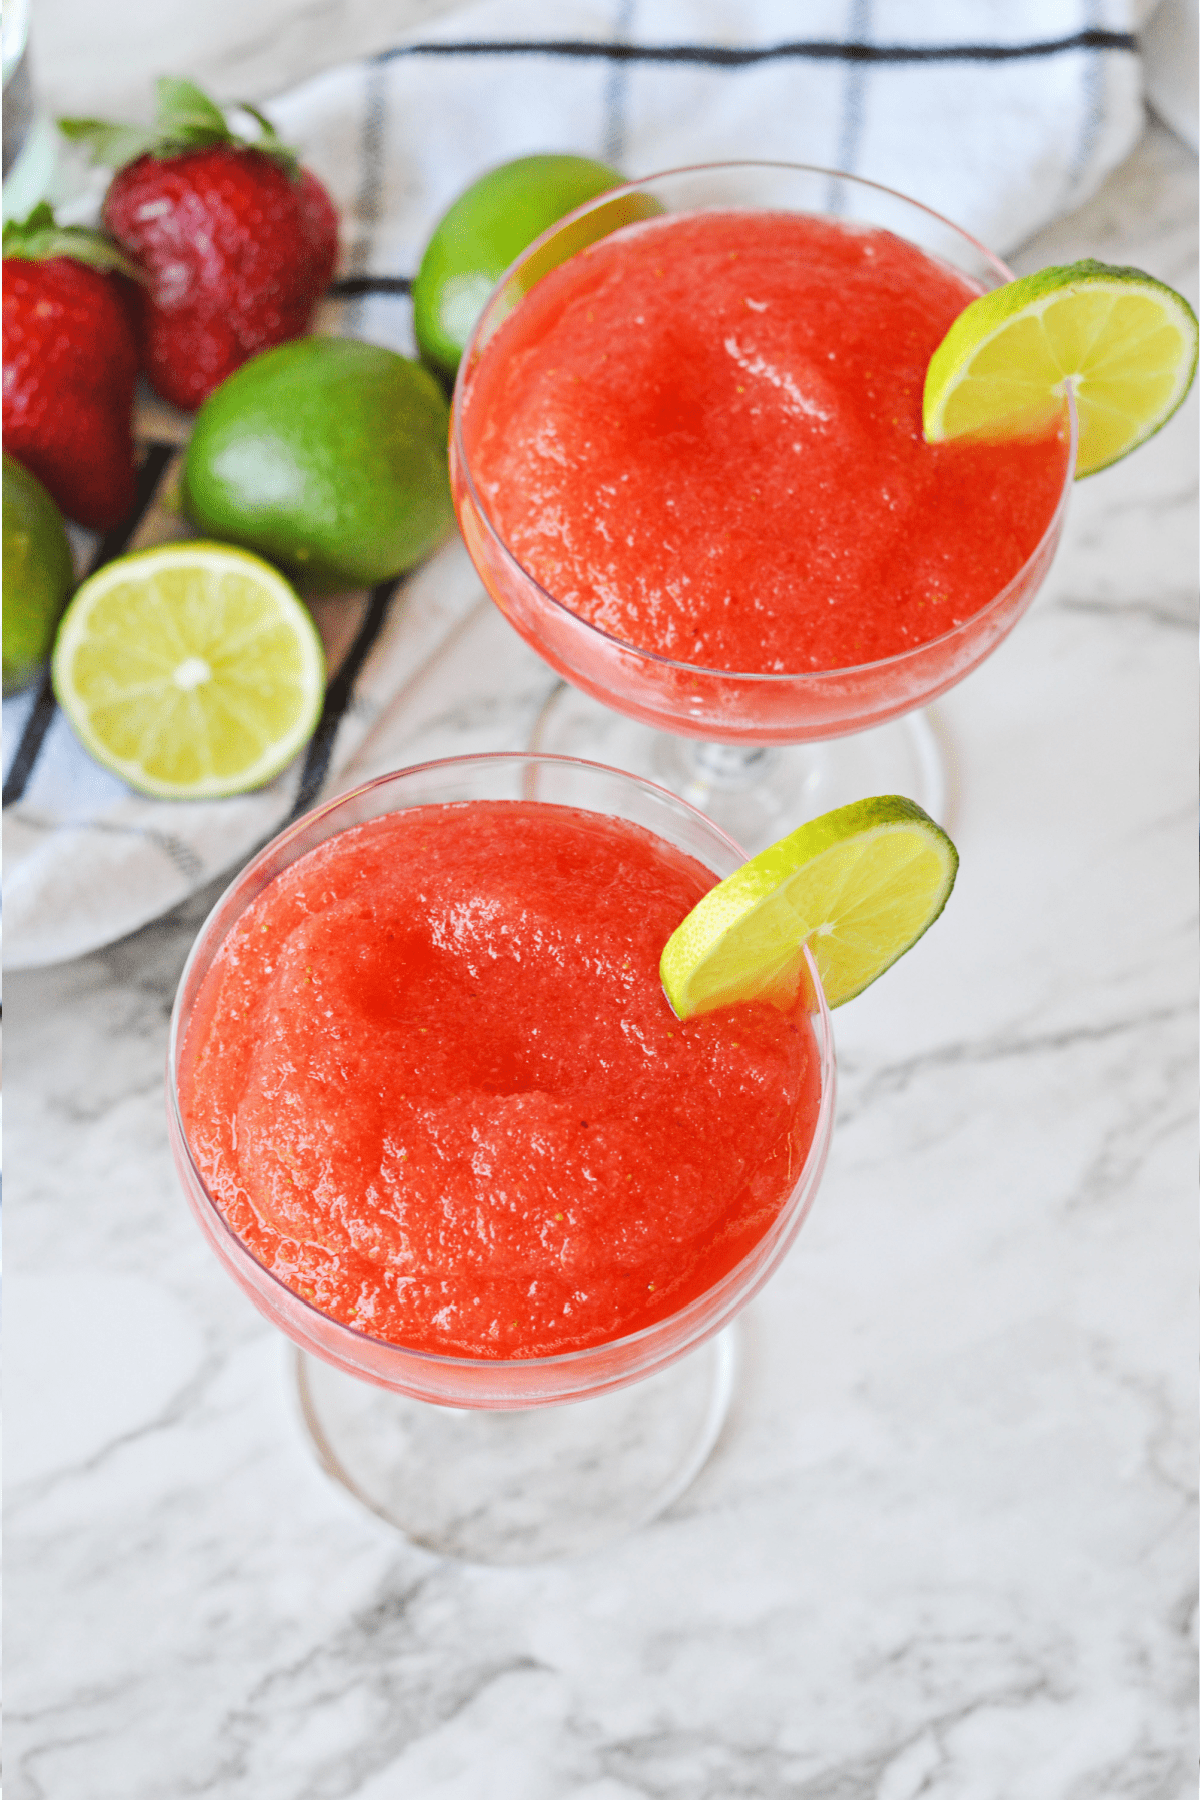 Frozen strawberry daiquiris from above